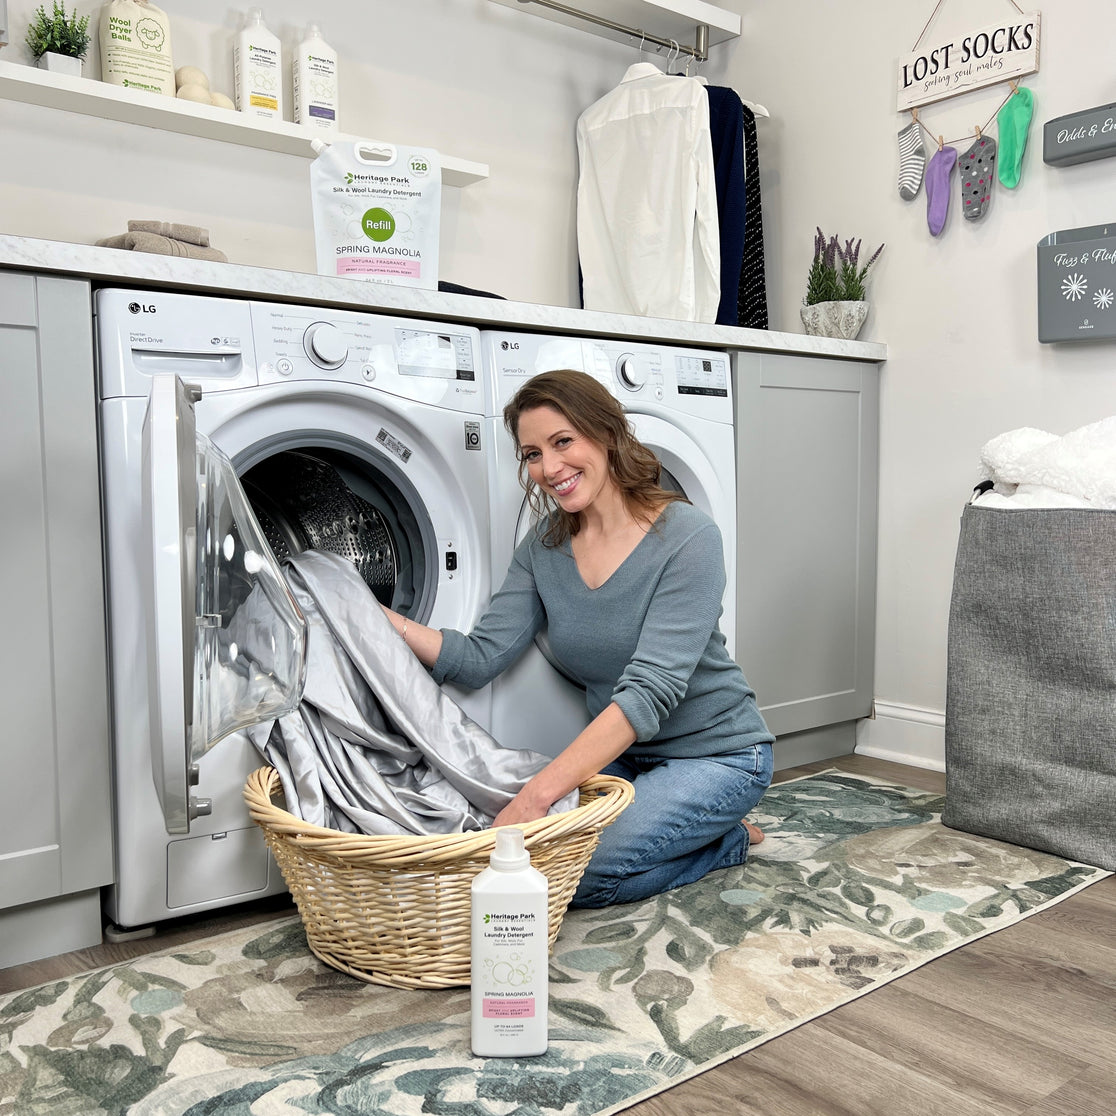 How To Keep A Front-Load Washing Machine Clean & Smelling Sweet - Heritage  Park Laundry Essentials